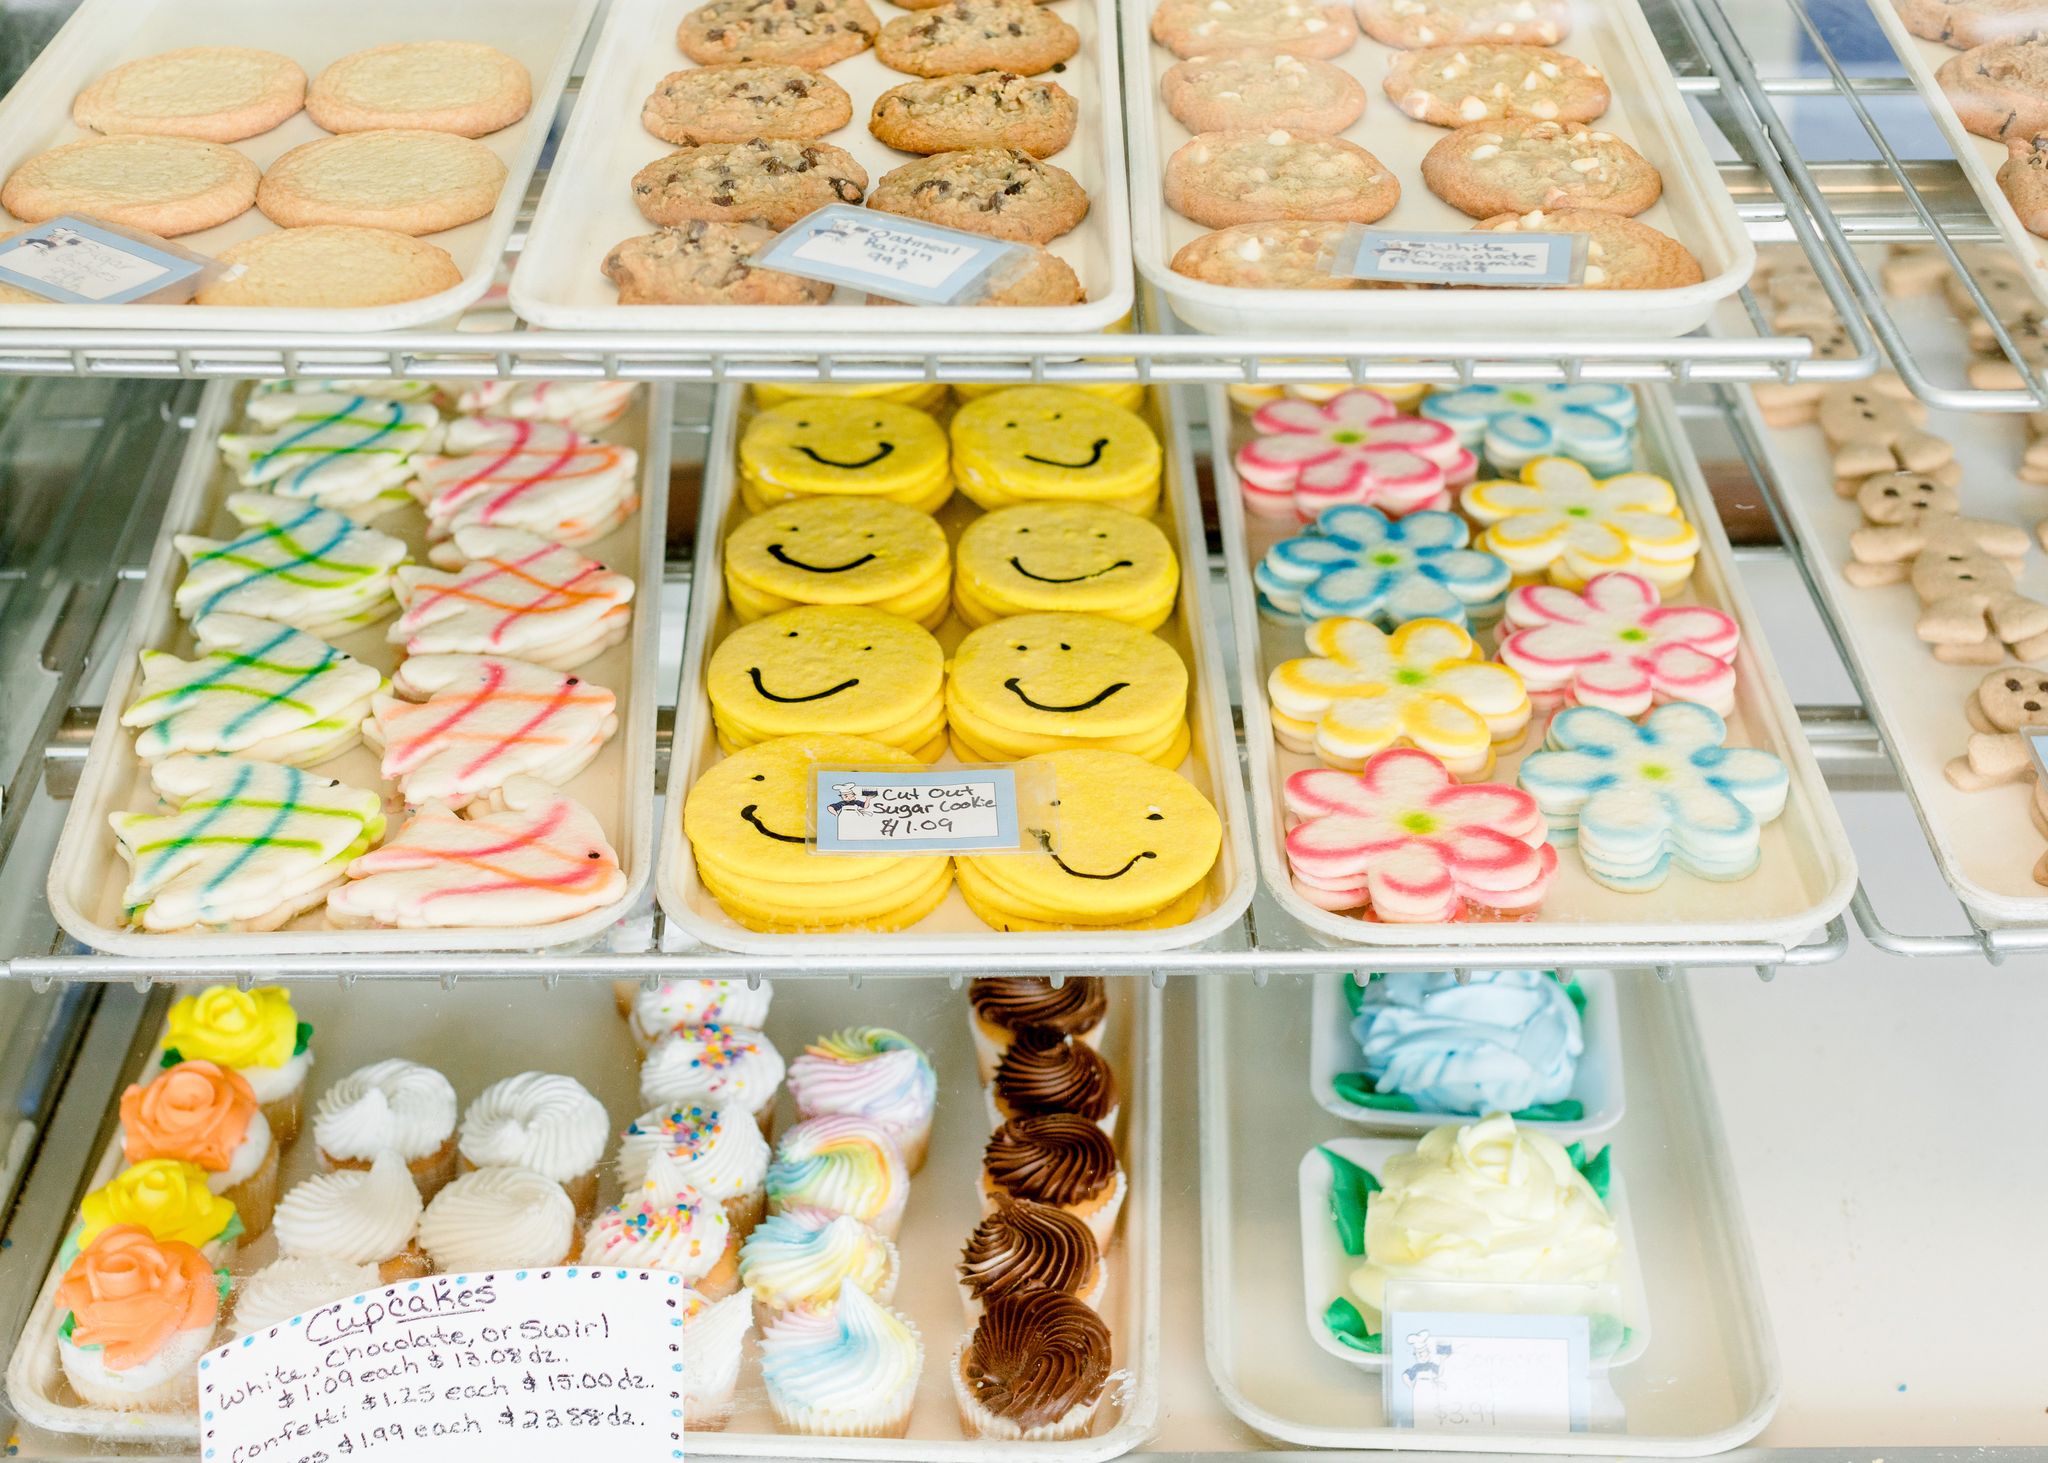 Sugar cut cookies sit in a display case at Sweet Shoppe Bakery in High Point, NC.